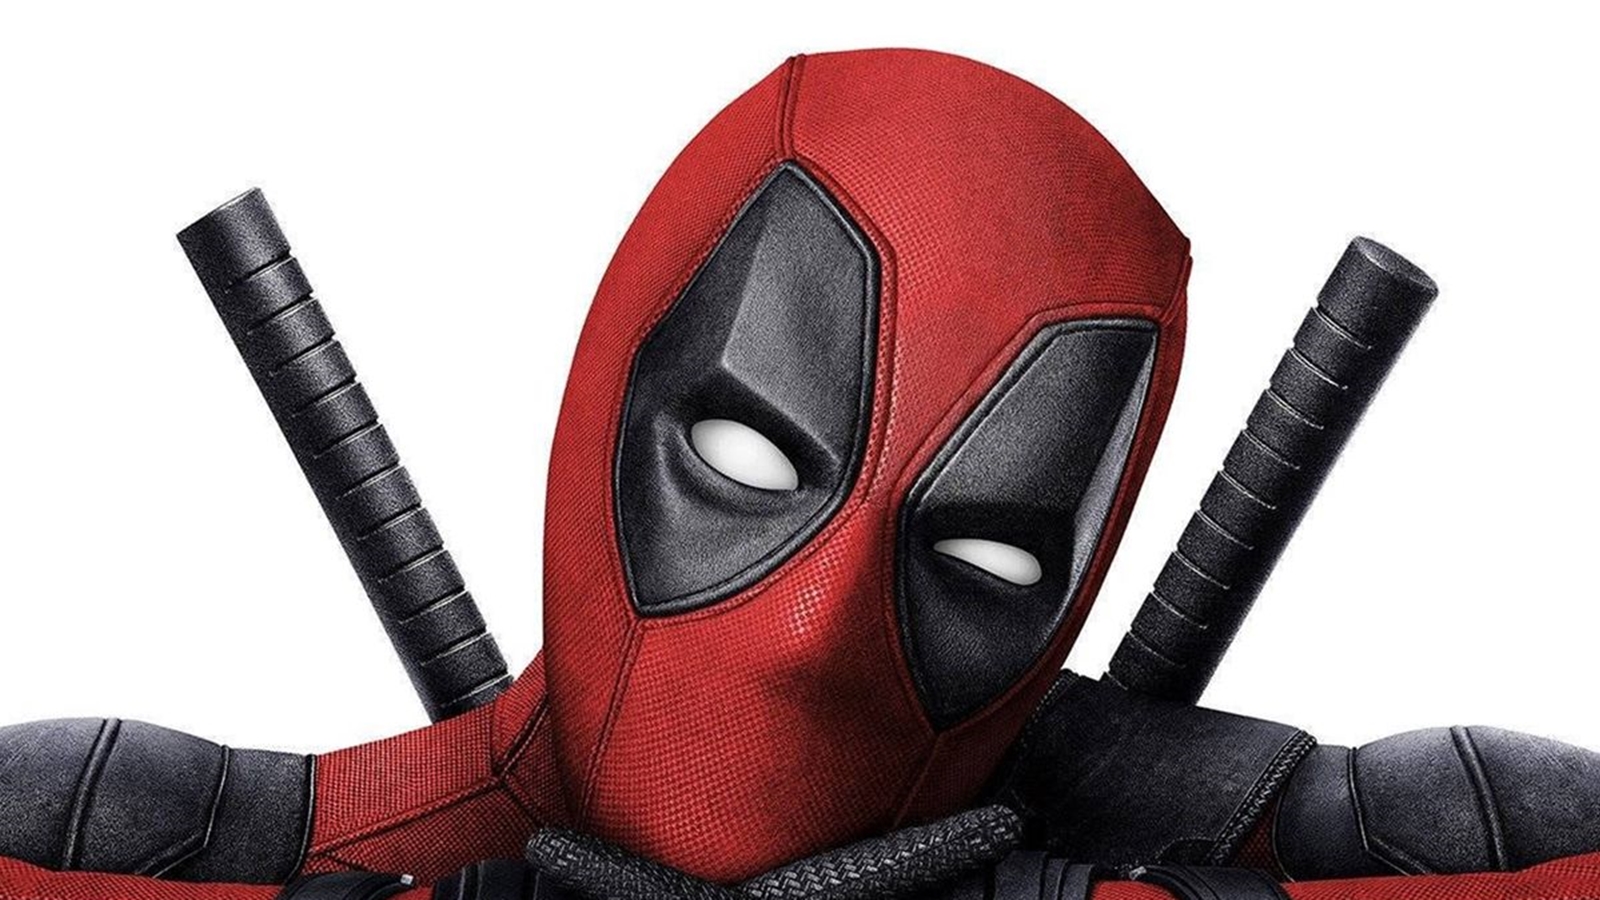 Deadpool 3 could miss its May 2024 release date